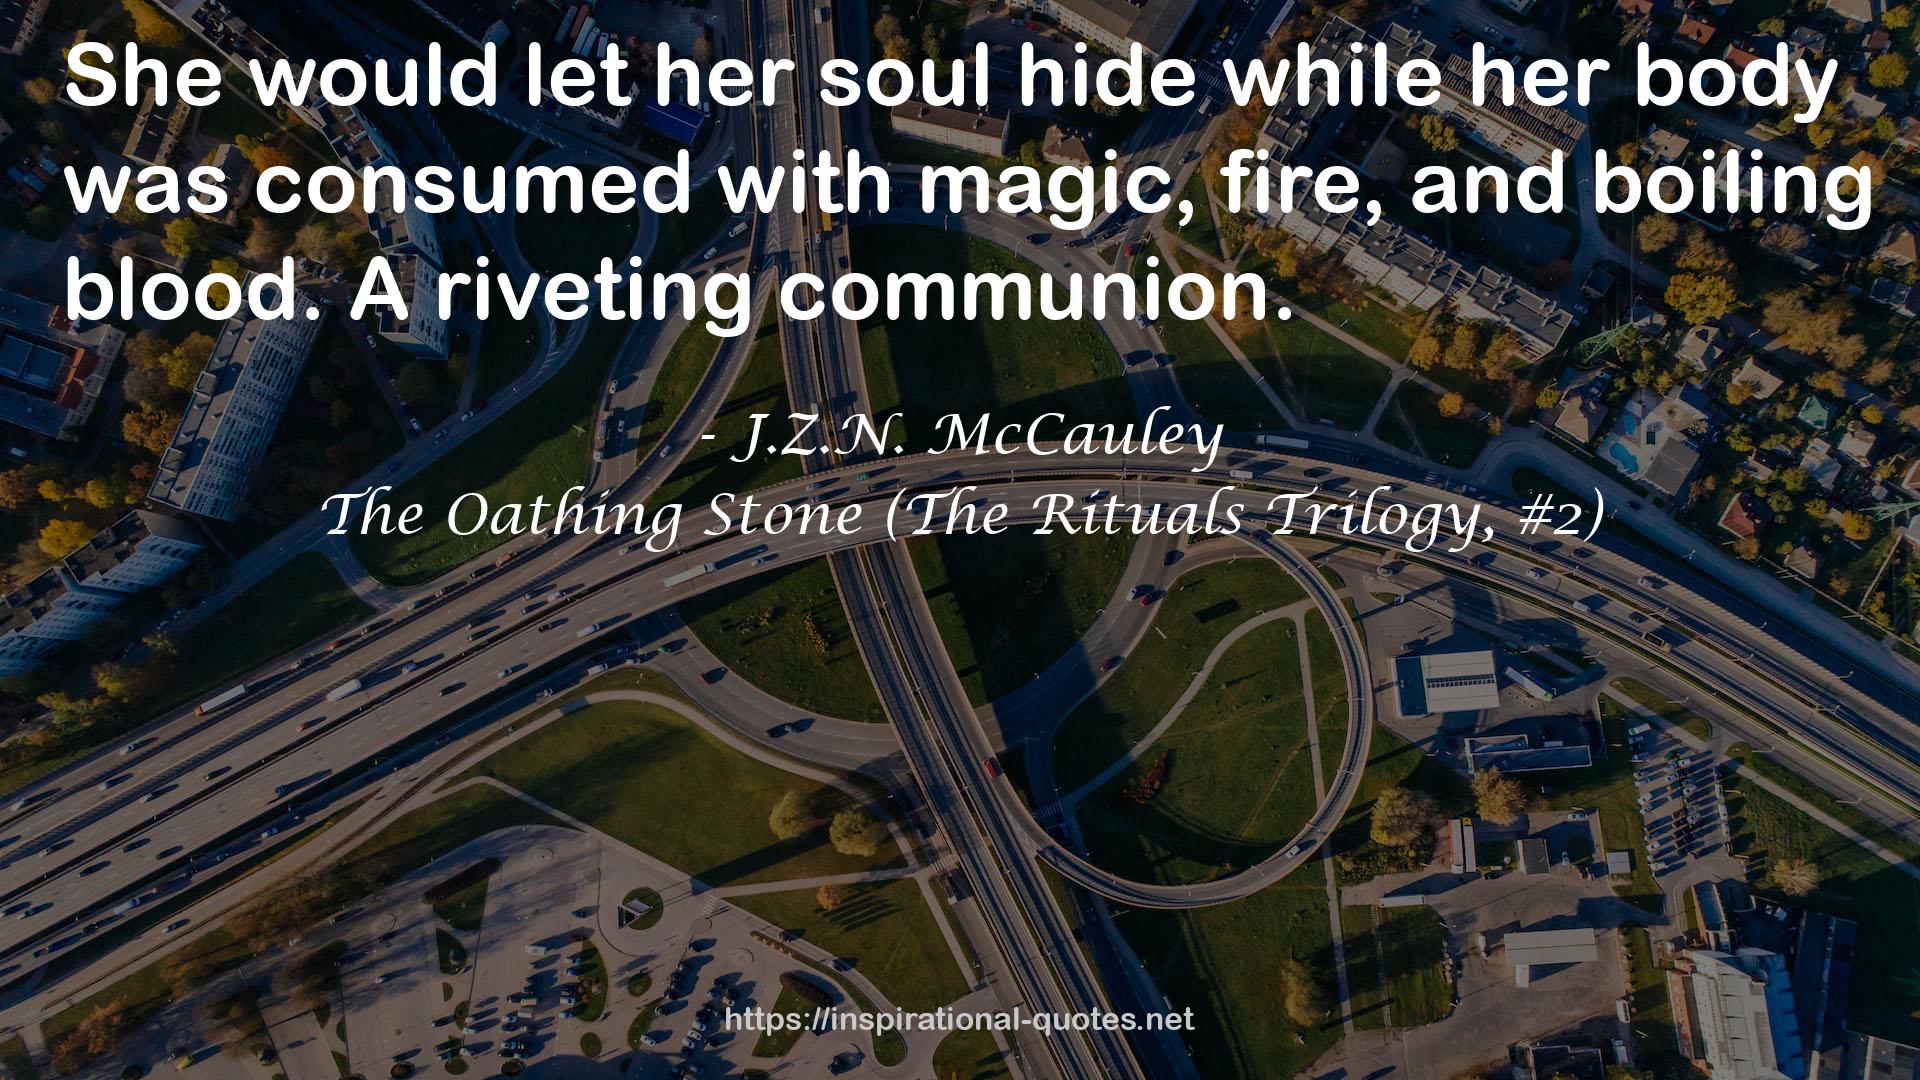 The Oathing Stone (The Rituals Trilogy, #2) QUOTES